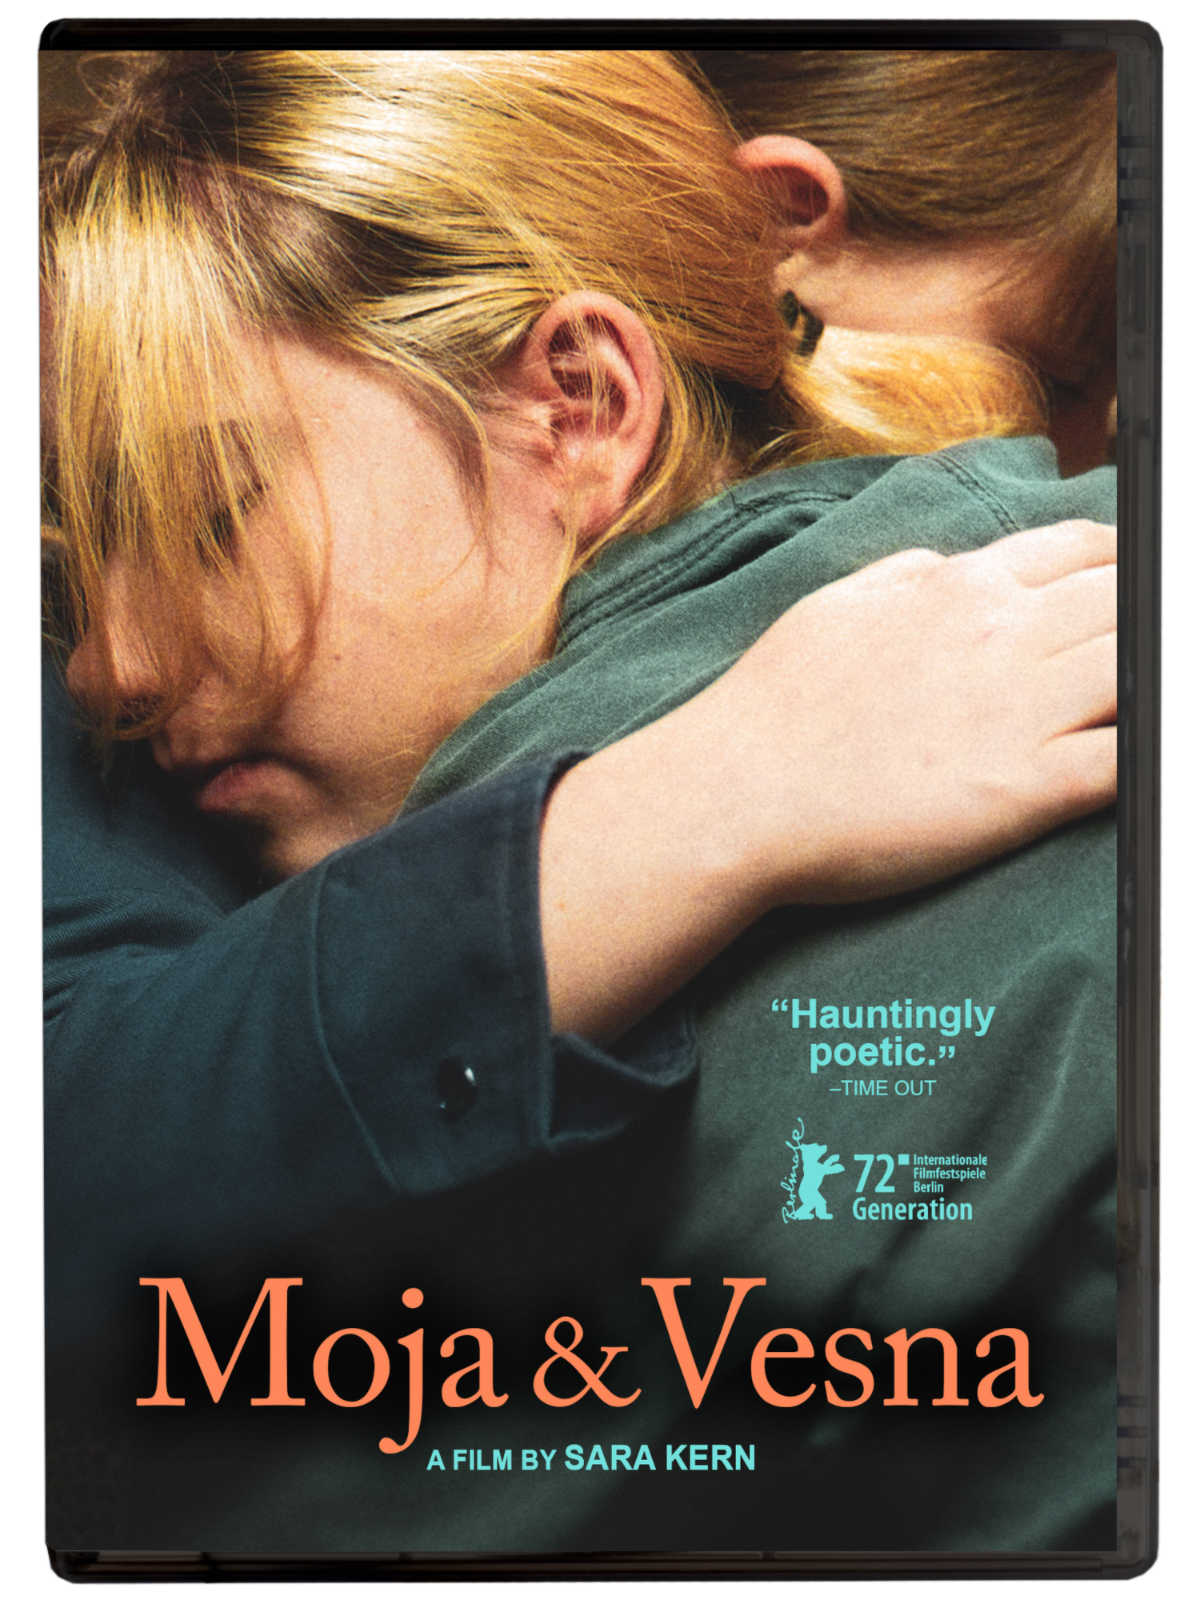 Moja & Vesna is a thought-provoking film nominated at festivals worldwide. Moja, a young girl, grapples with grief and a fractured family after her mother's death. Vesna, her pregnant sister, struggles. Can Moja find solace and hope?